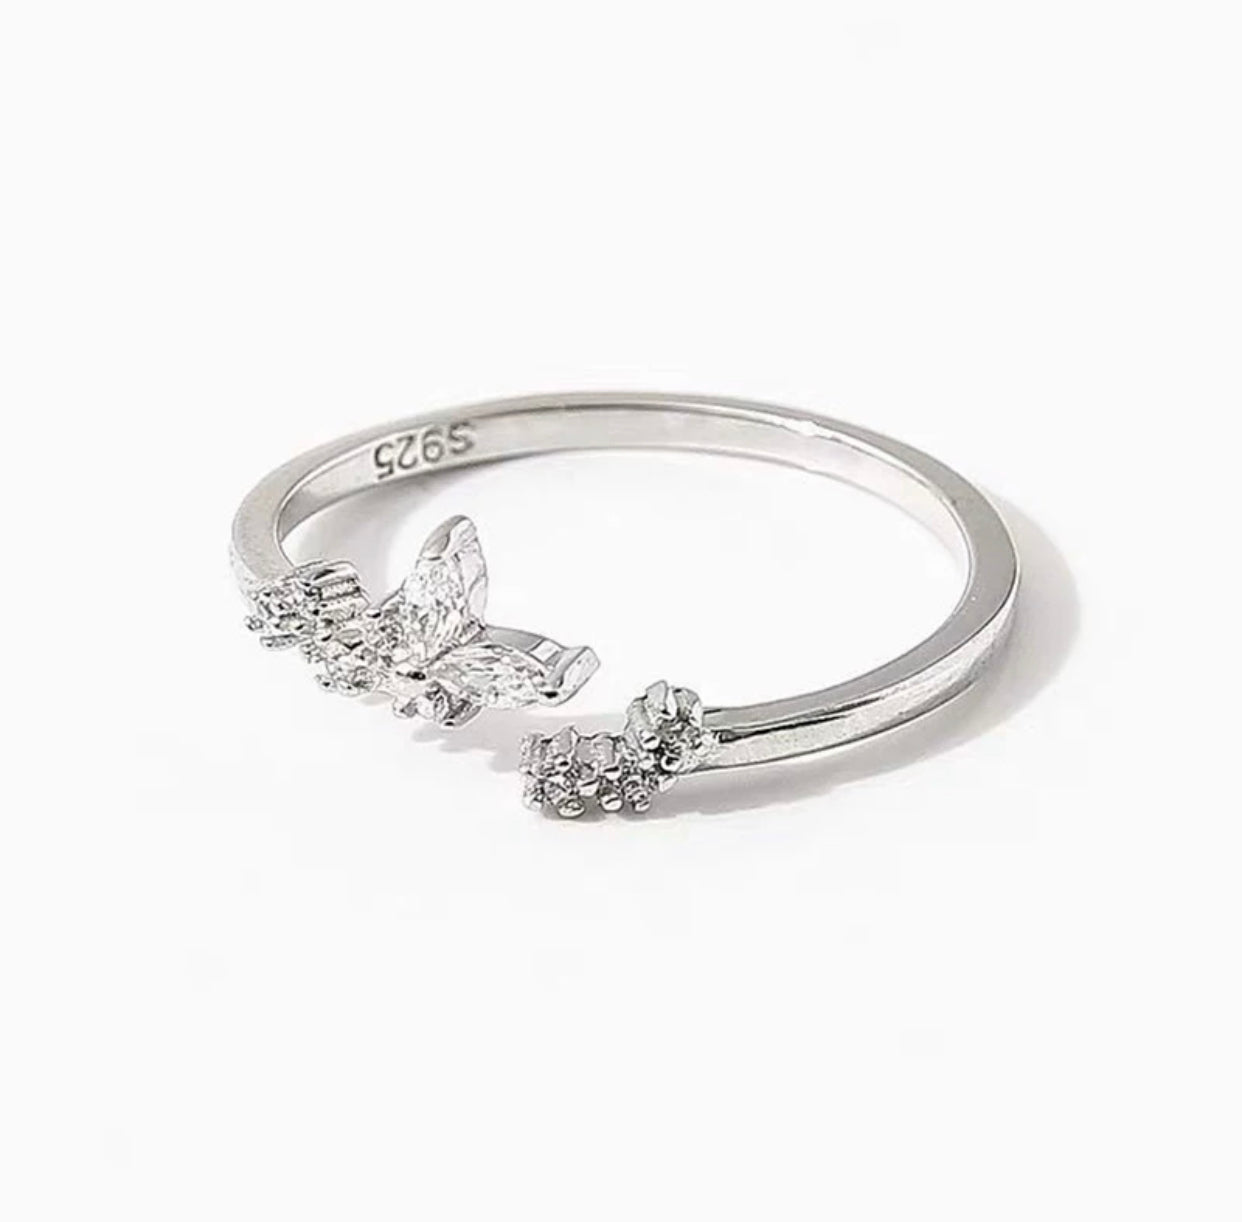 CATERNIA DAINTY BUTTERFLY STERLING SILVER  RING